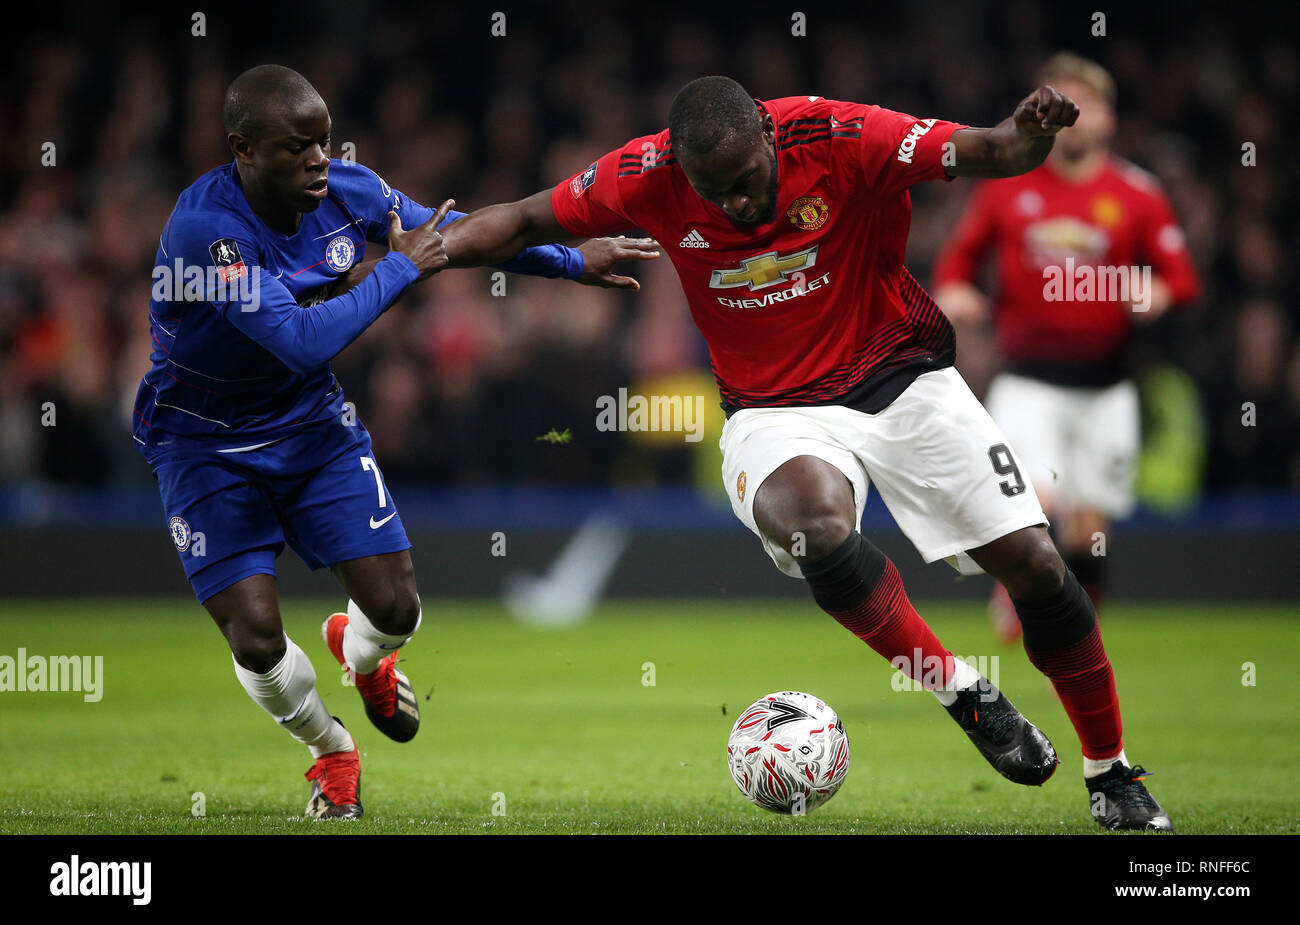 Chelsea's N'Golo Kante (left) and Manchester United's Romelu Lukaku battle  for the ball during the FA Cup fifth round match at Stamford Bridge, London  Stock Photo - Alamy